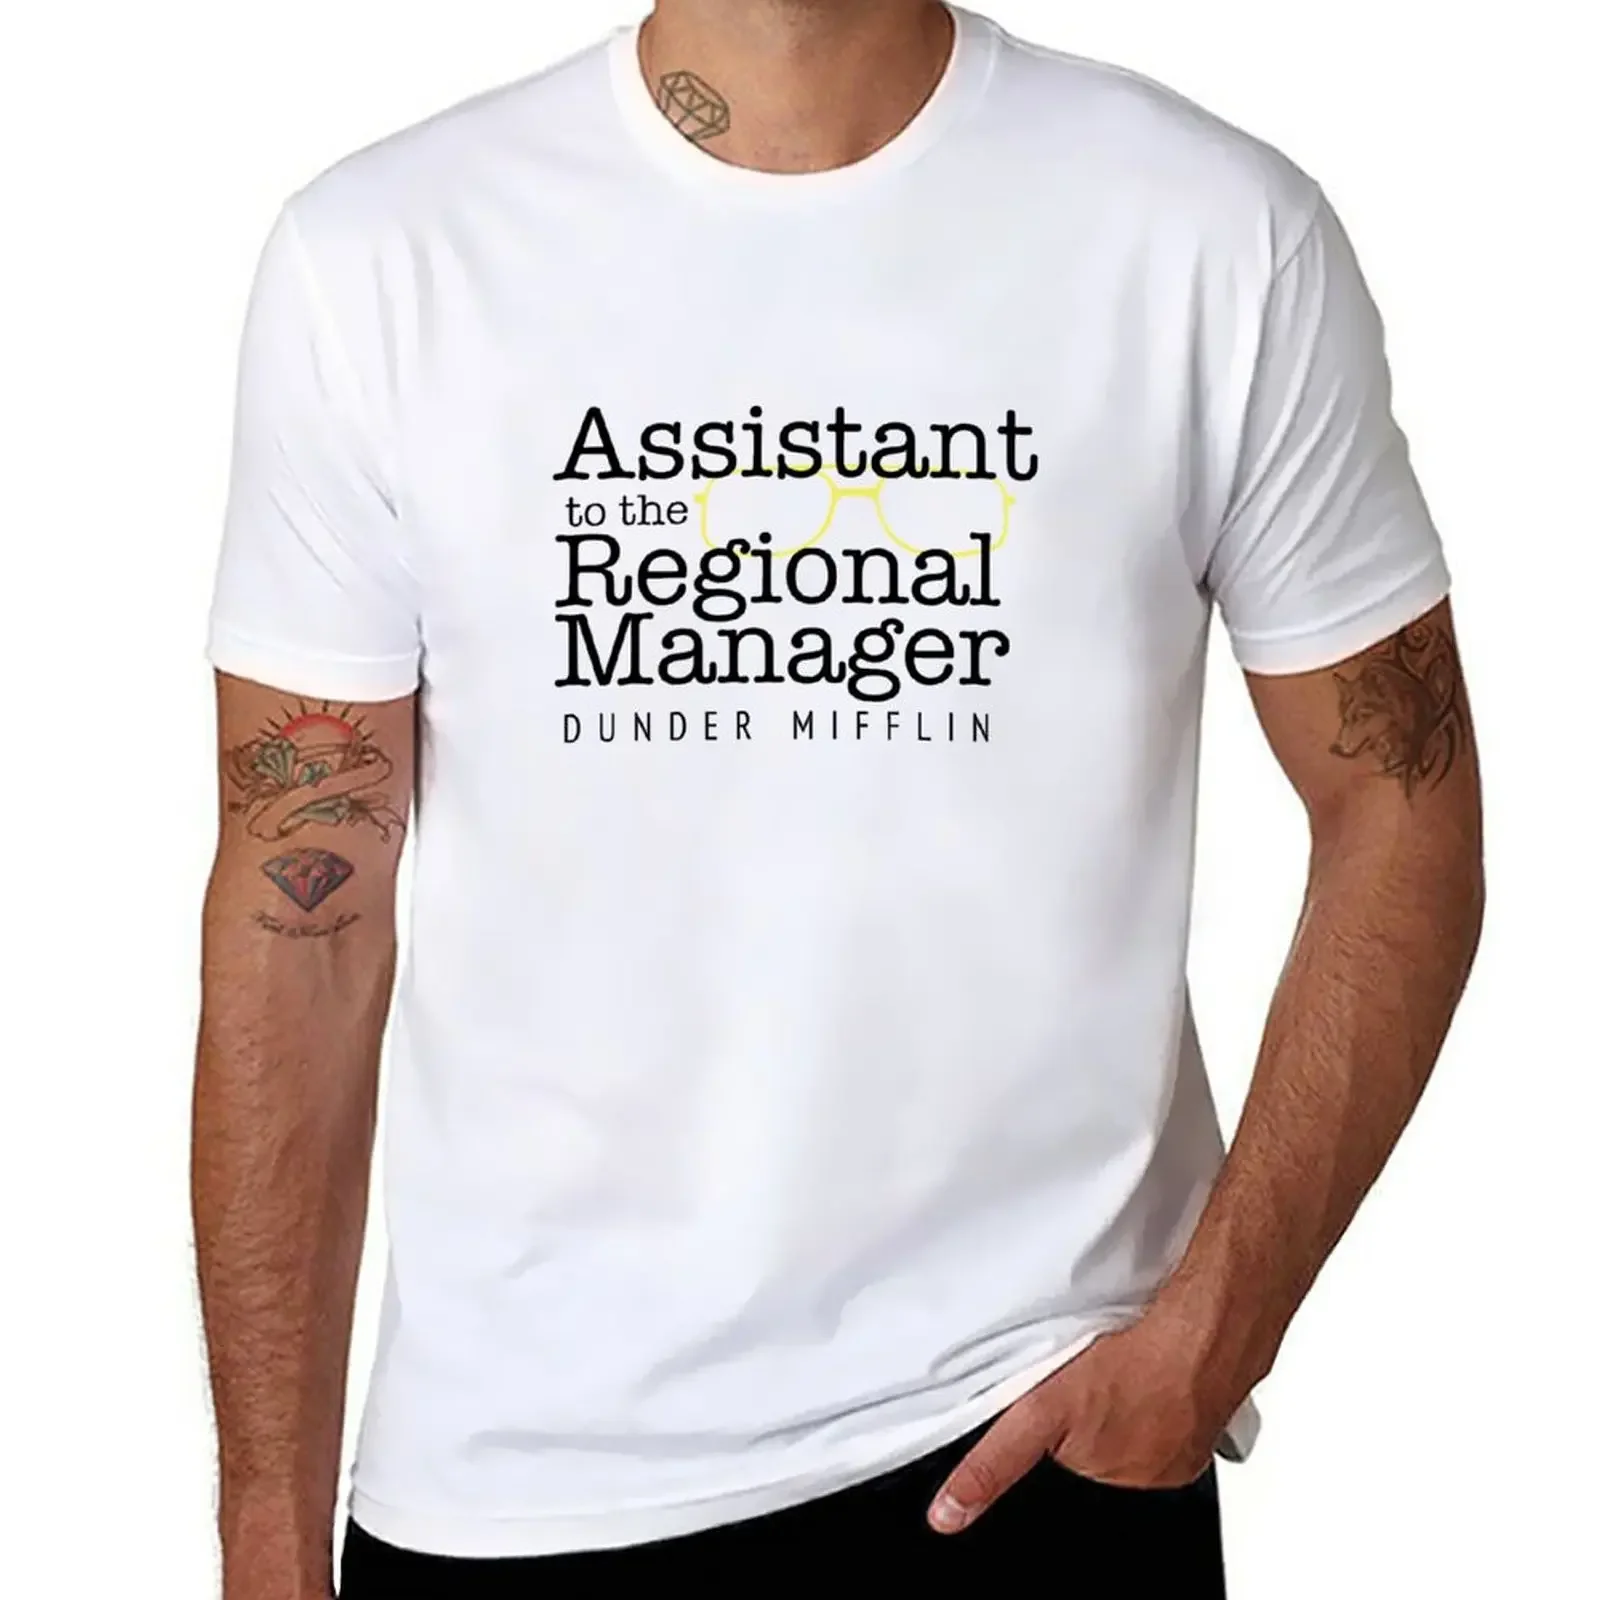 

Assistant to the Regional Manager T-Shirt sweat quick-drying plain white t shirts men